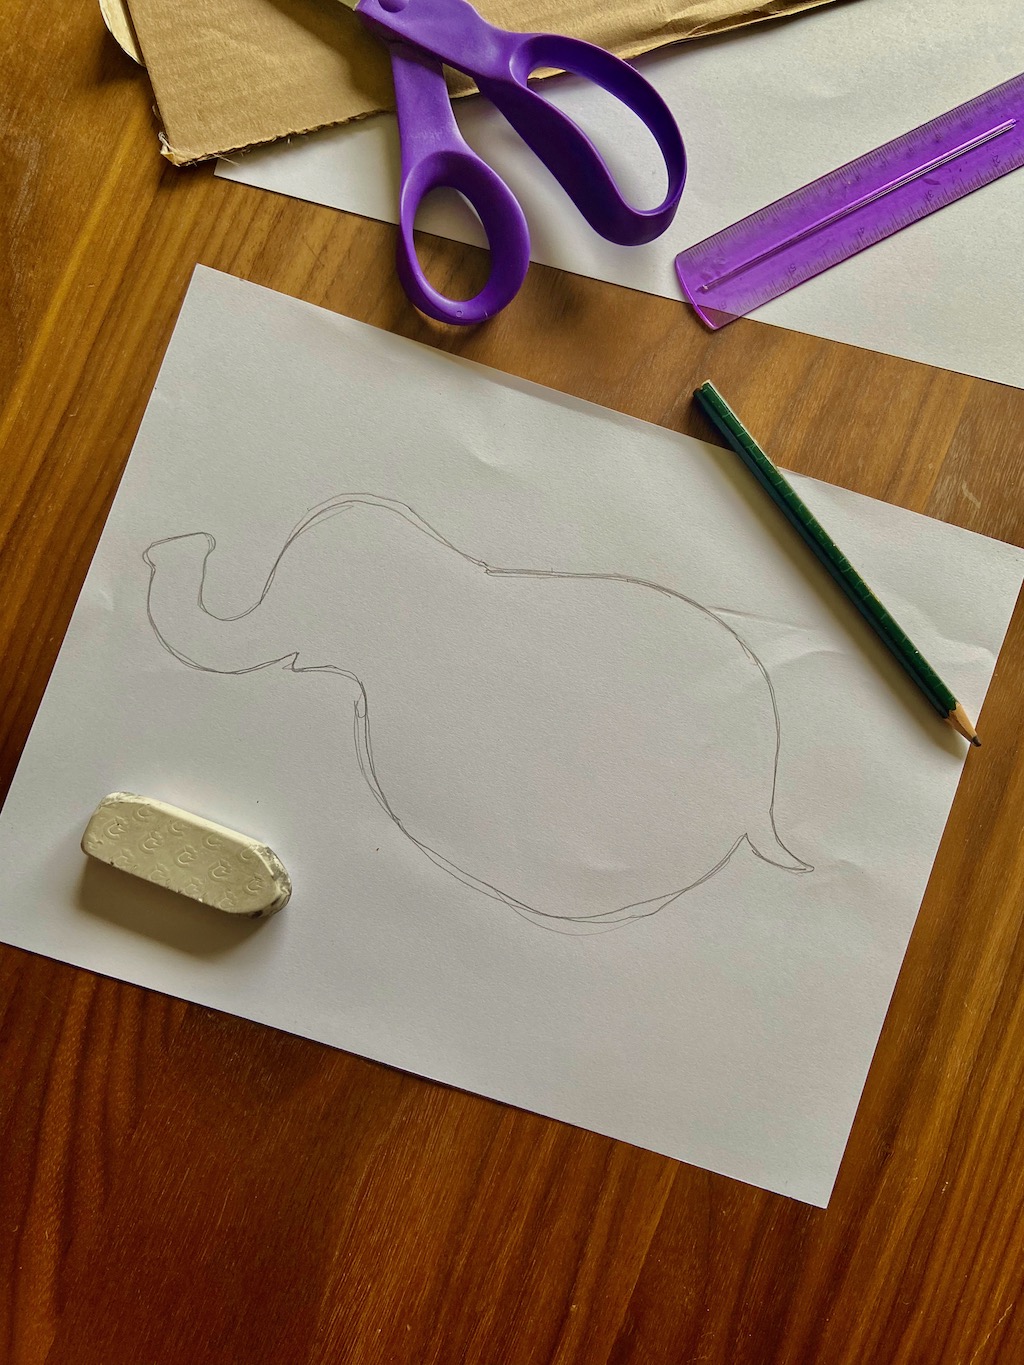 Sketch out the basic shape of the elephant’s side view onto a piece of paper or directly onto the cardboard - do not include any limbs or large features. This is our base shape.